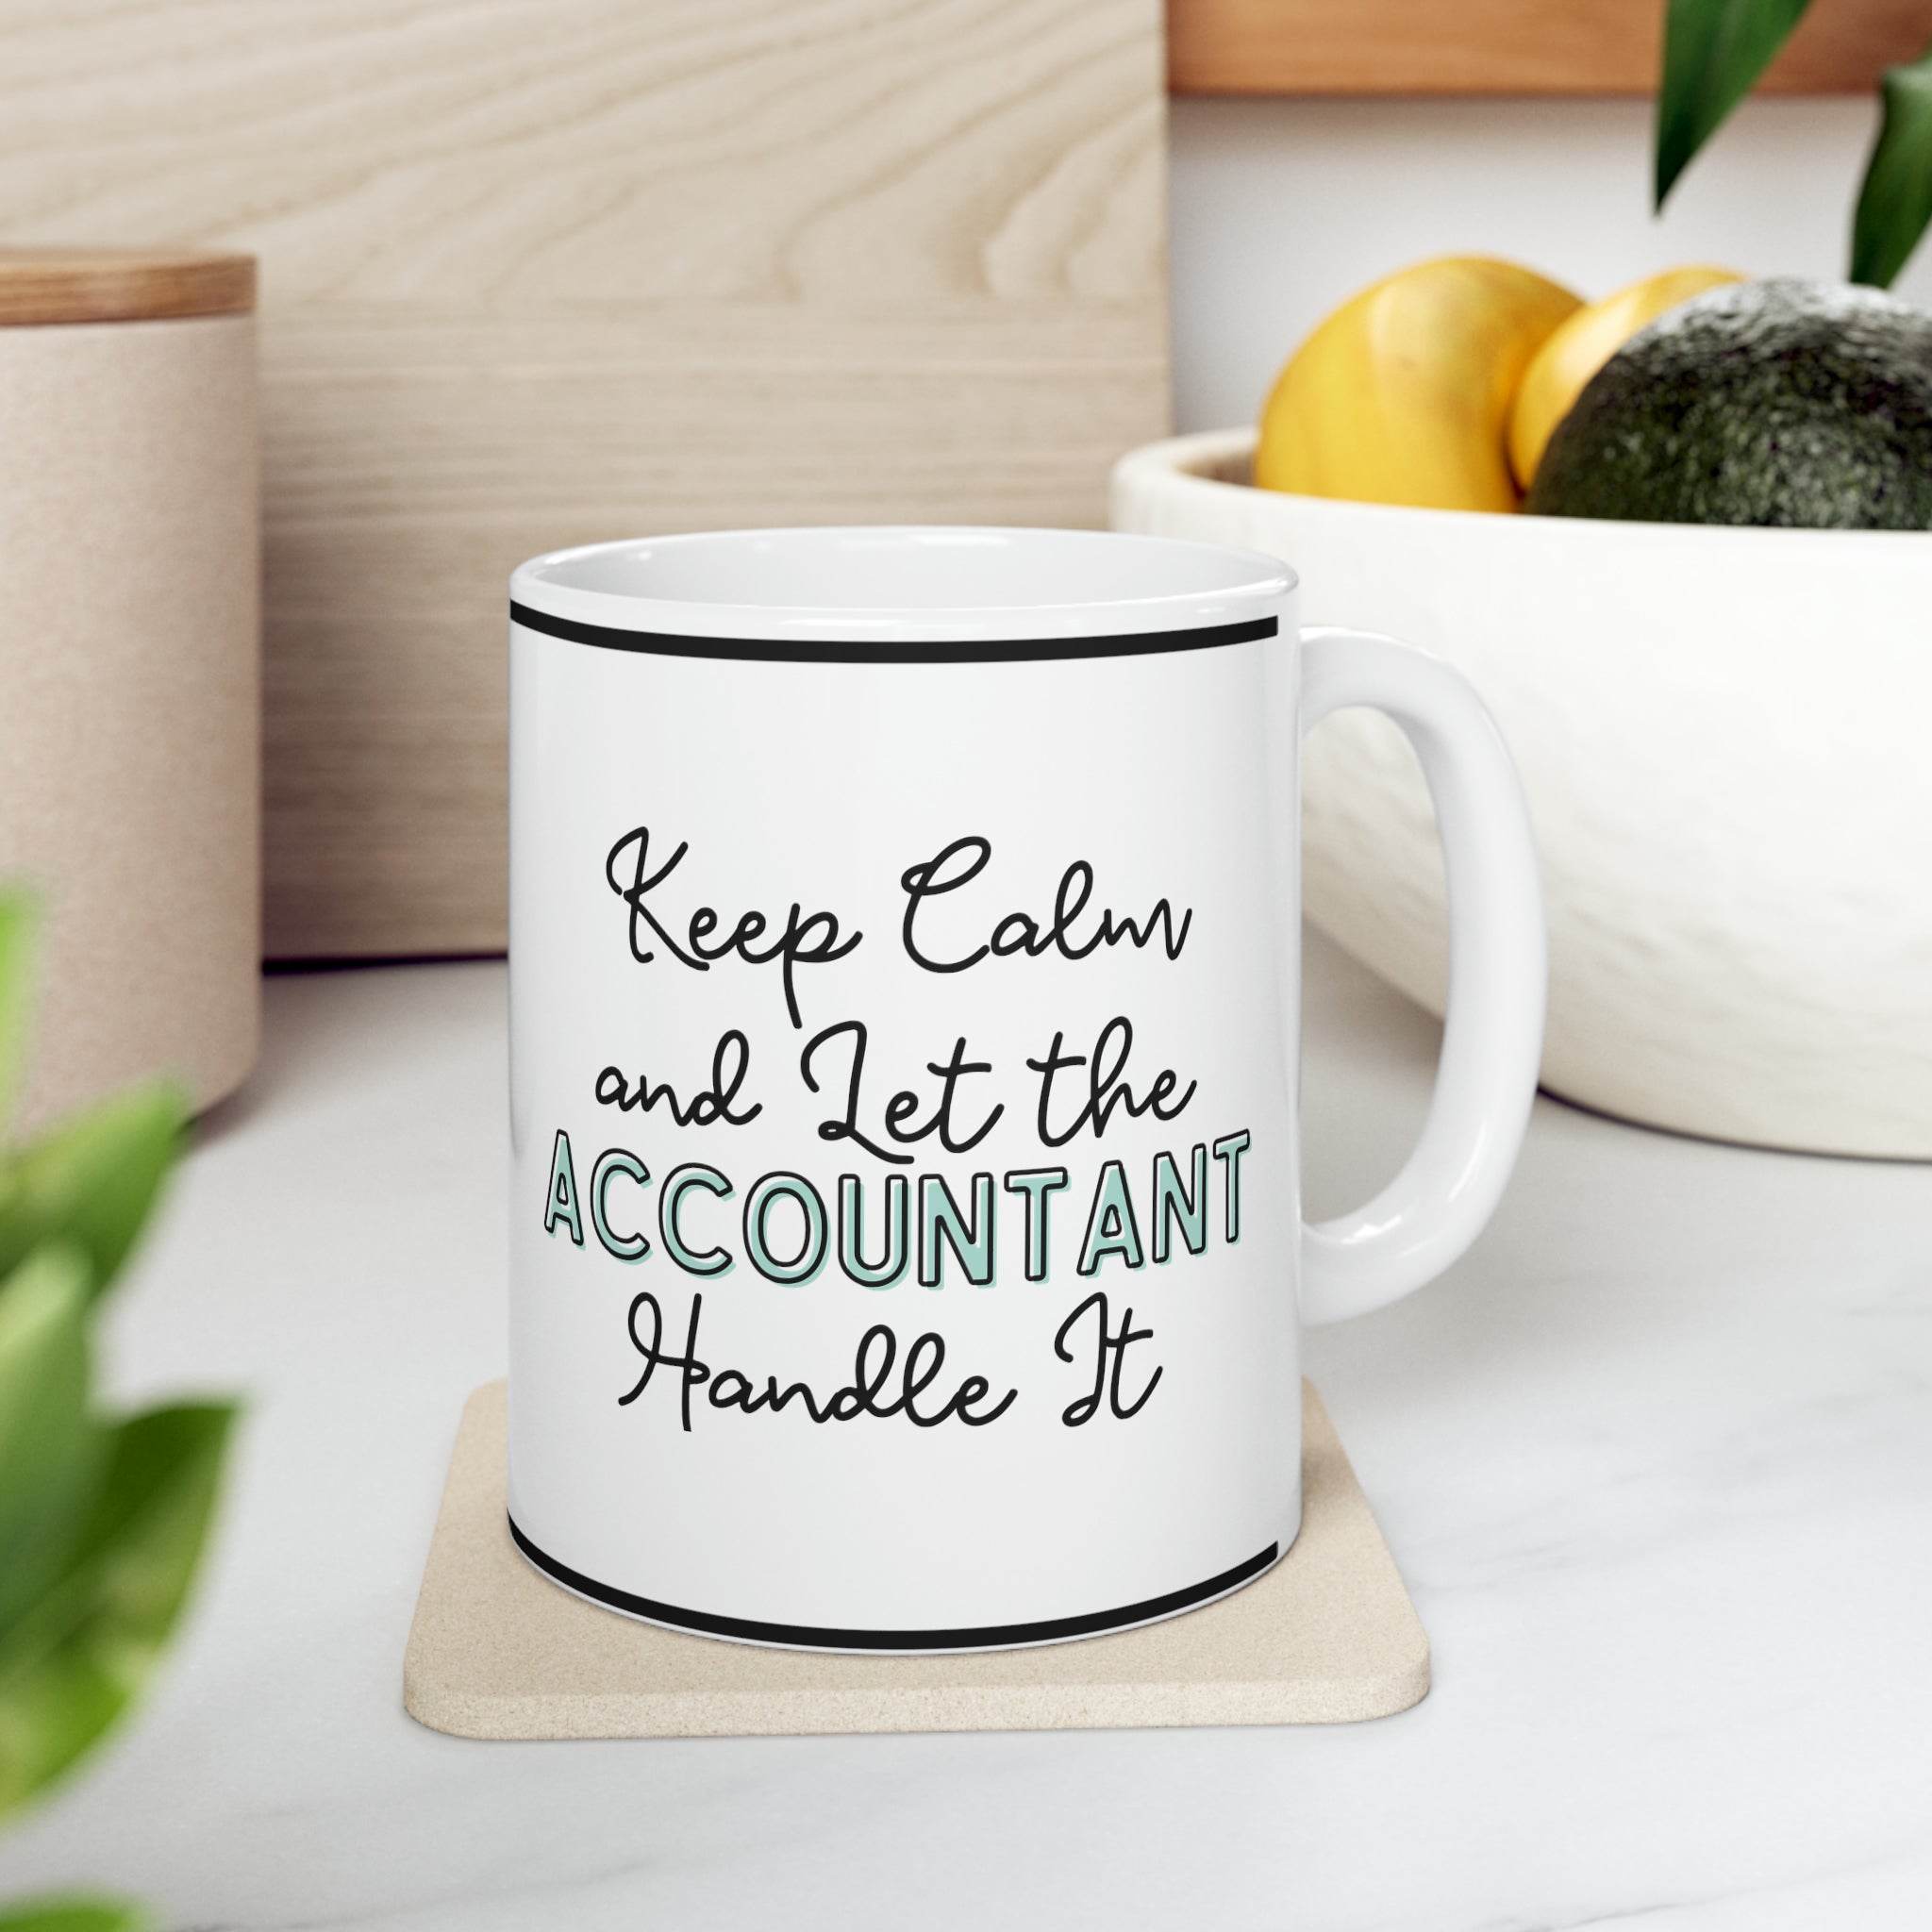 Introducing Our New Career Mugs: The Perfect Mug for Every Professional